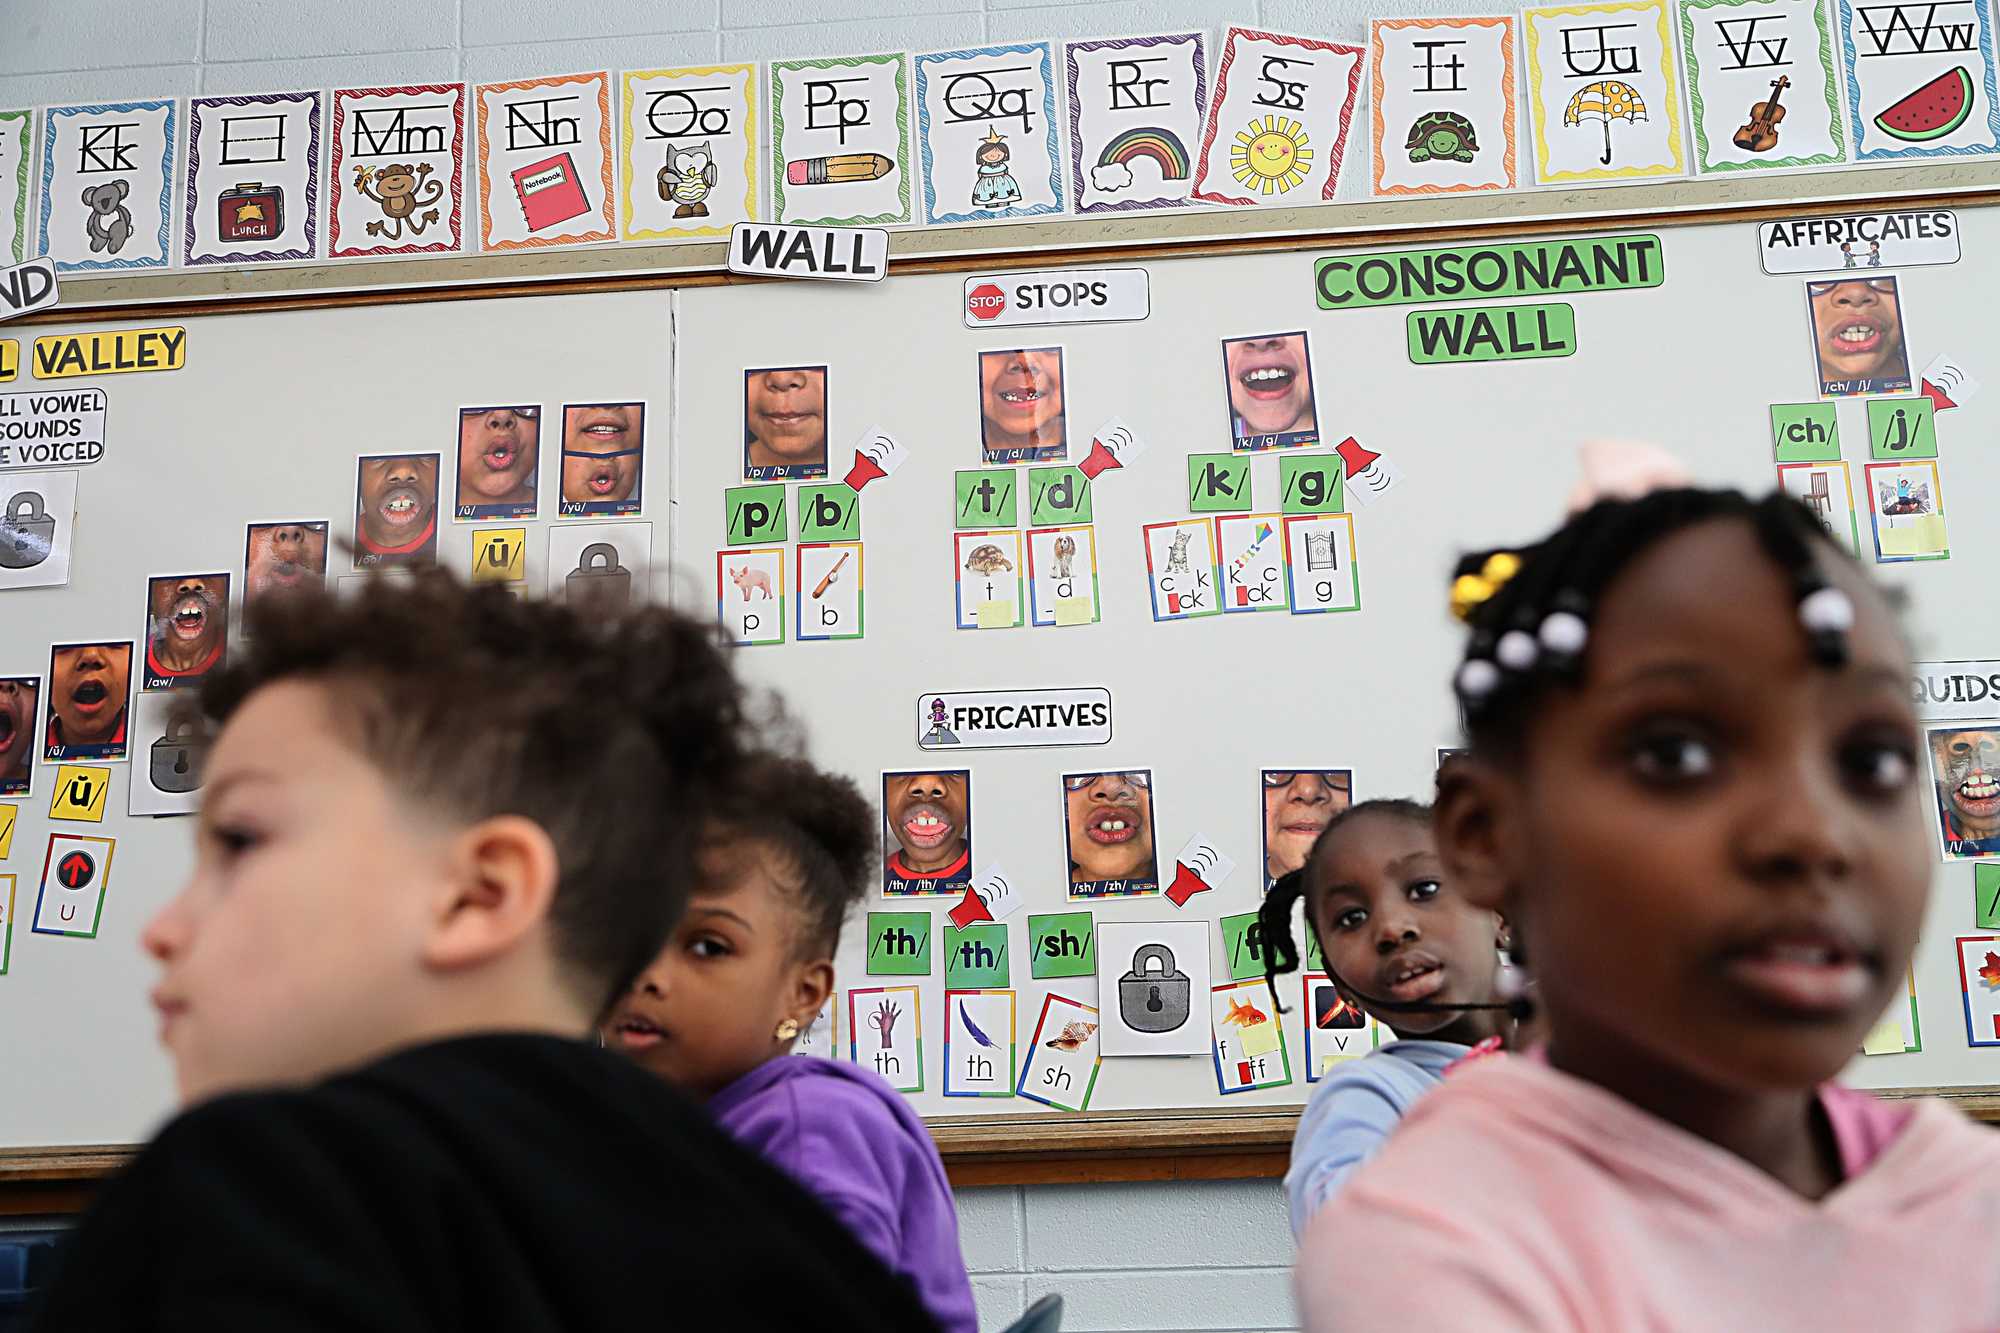 First grade students at Margaret L. Donovan Elementary School in Randolph listened to their teacher during a reading lesson. A “sound wall” on the white board behind them shows students how to form different sounds with their mouths. Randolph school leaders say a new structured literacy curriculum has helped improve students' reading skills.